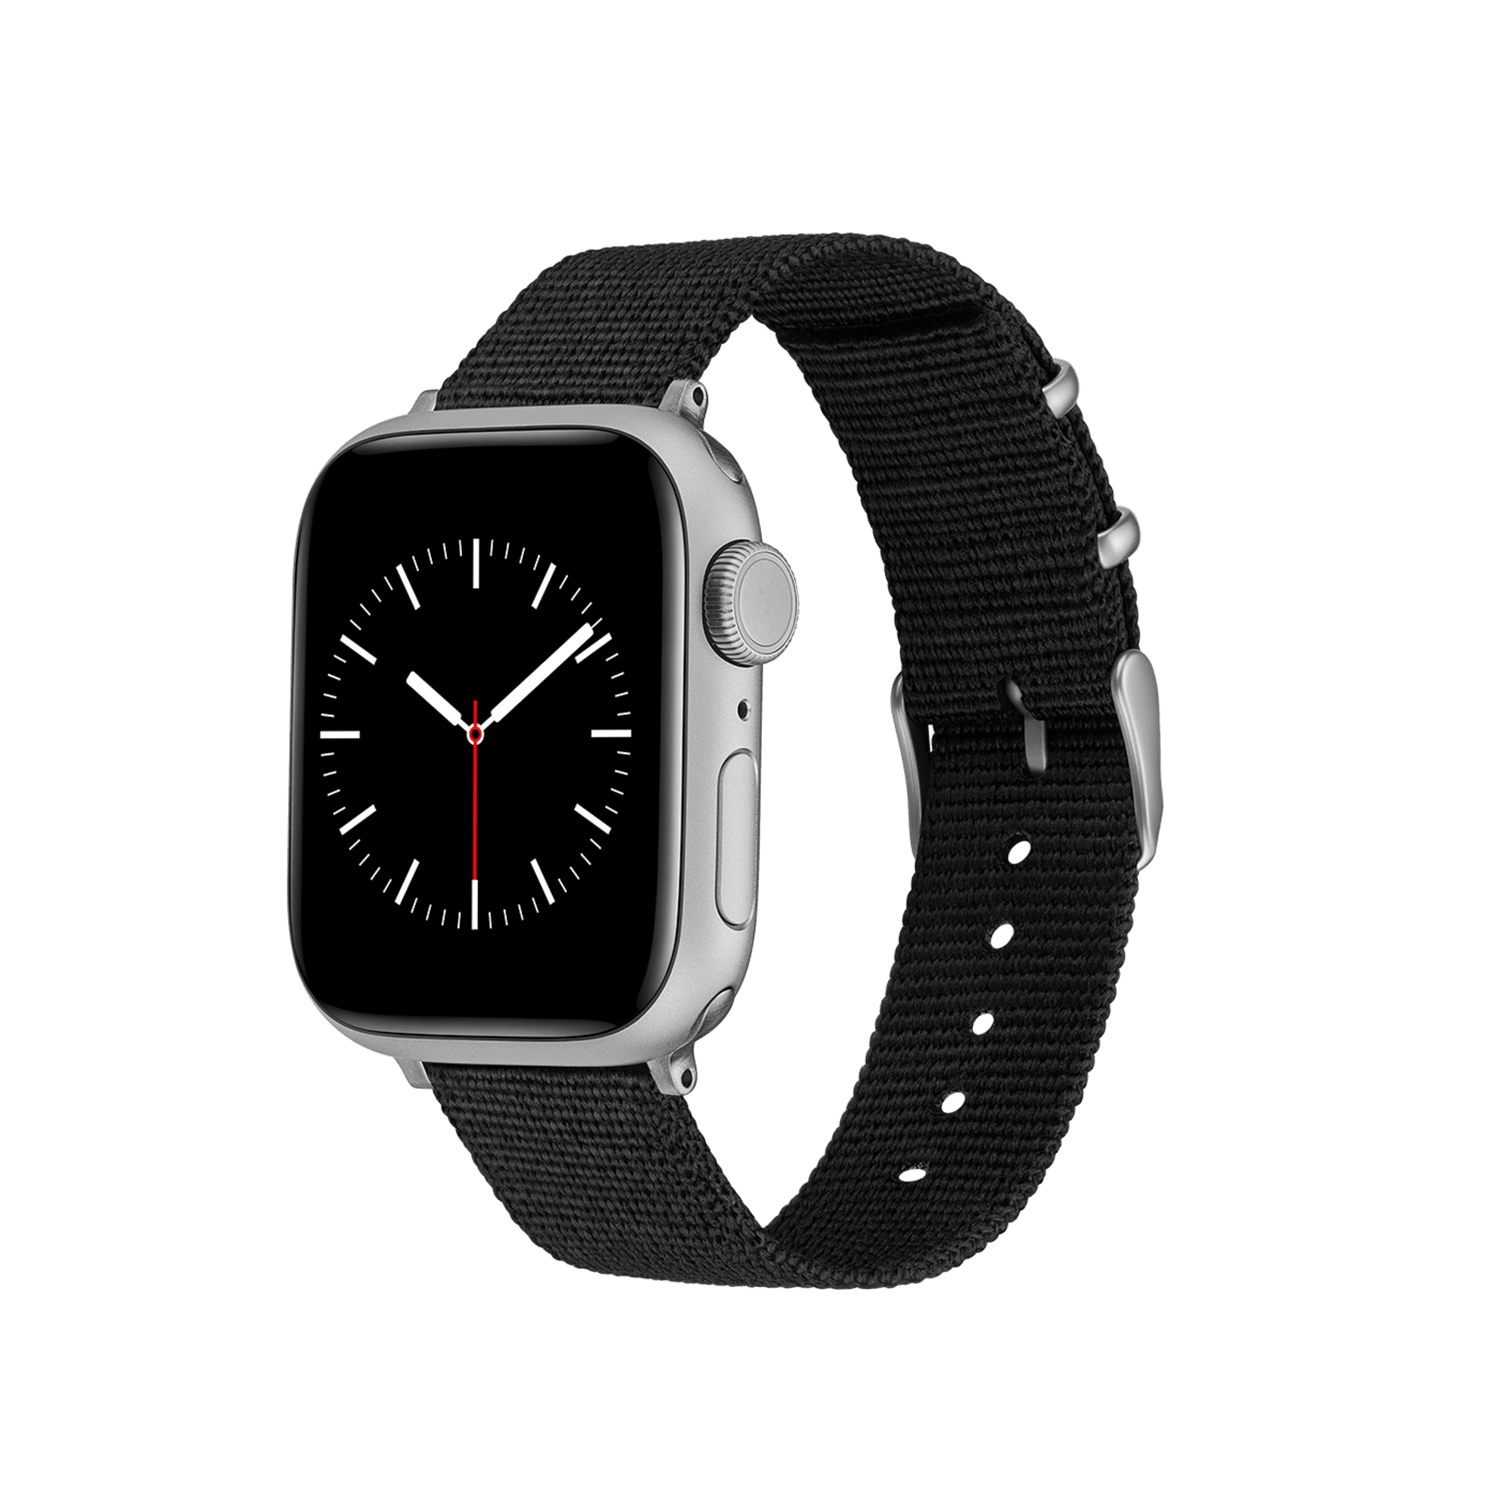 Smartwatch cases and straps - cases for Apple Watch | DW